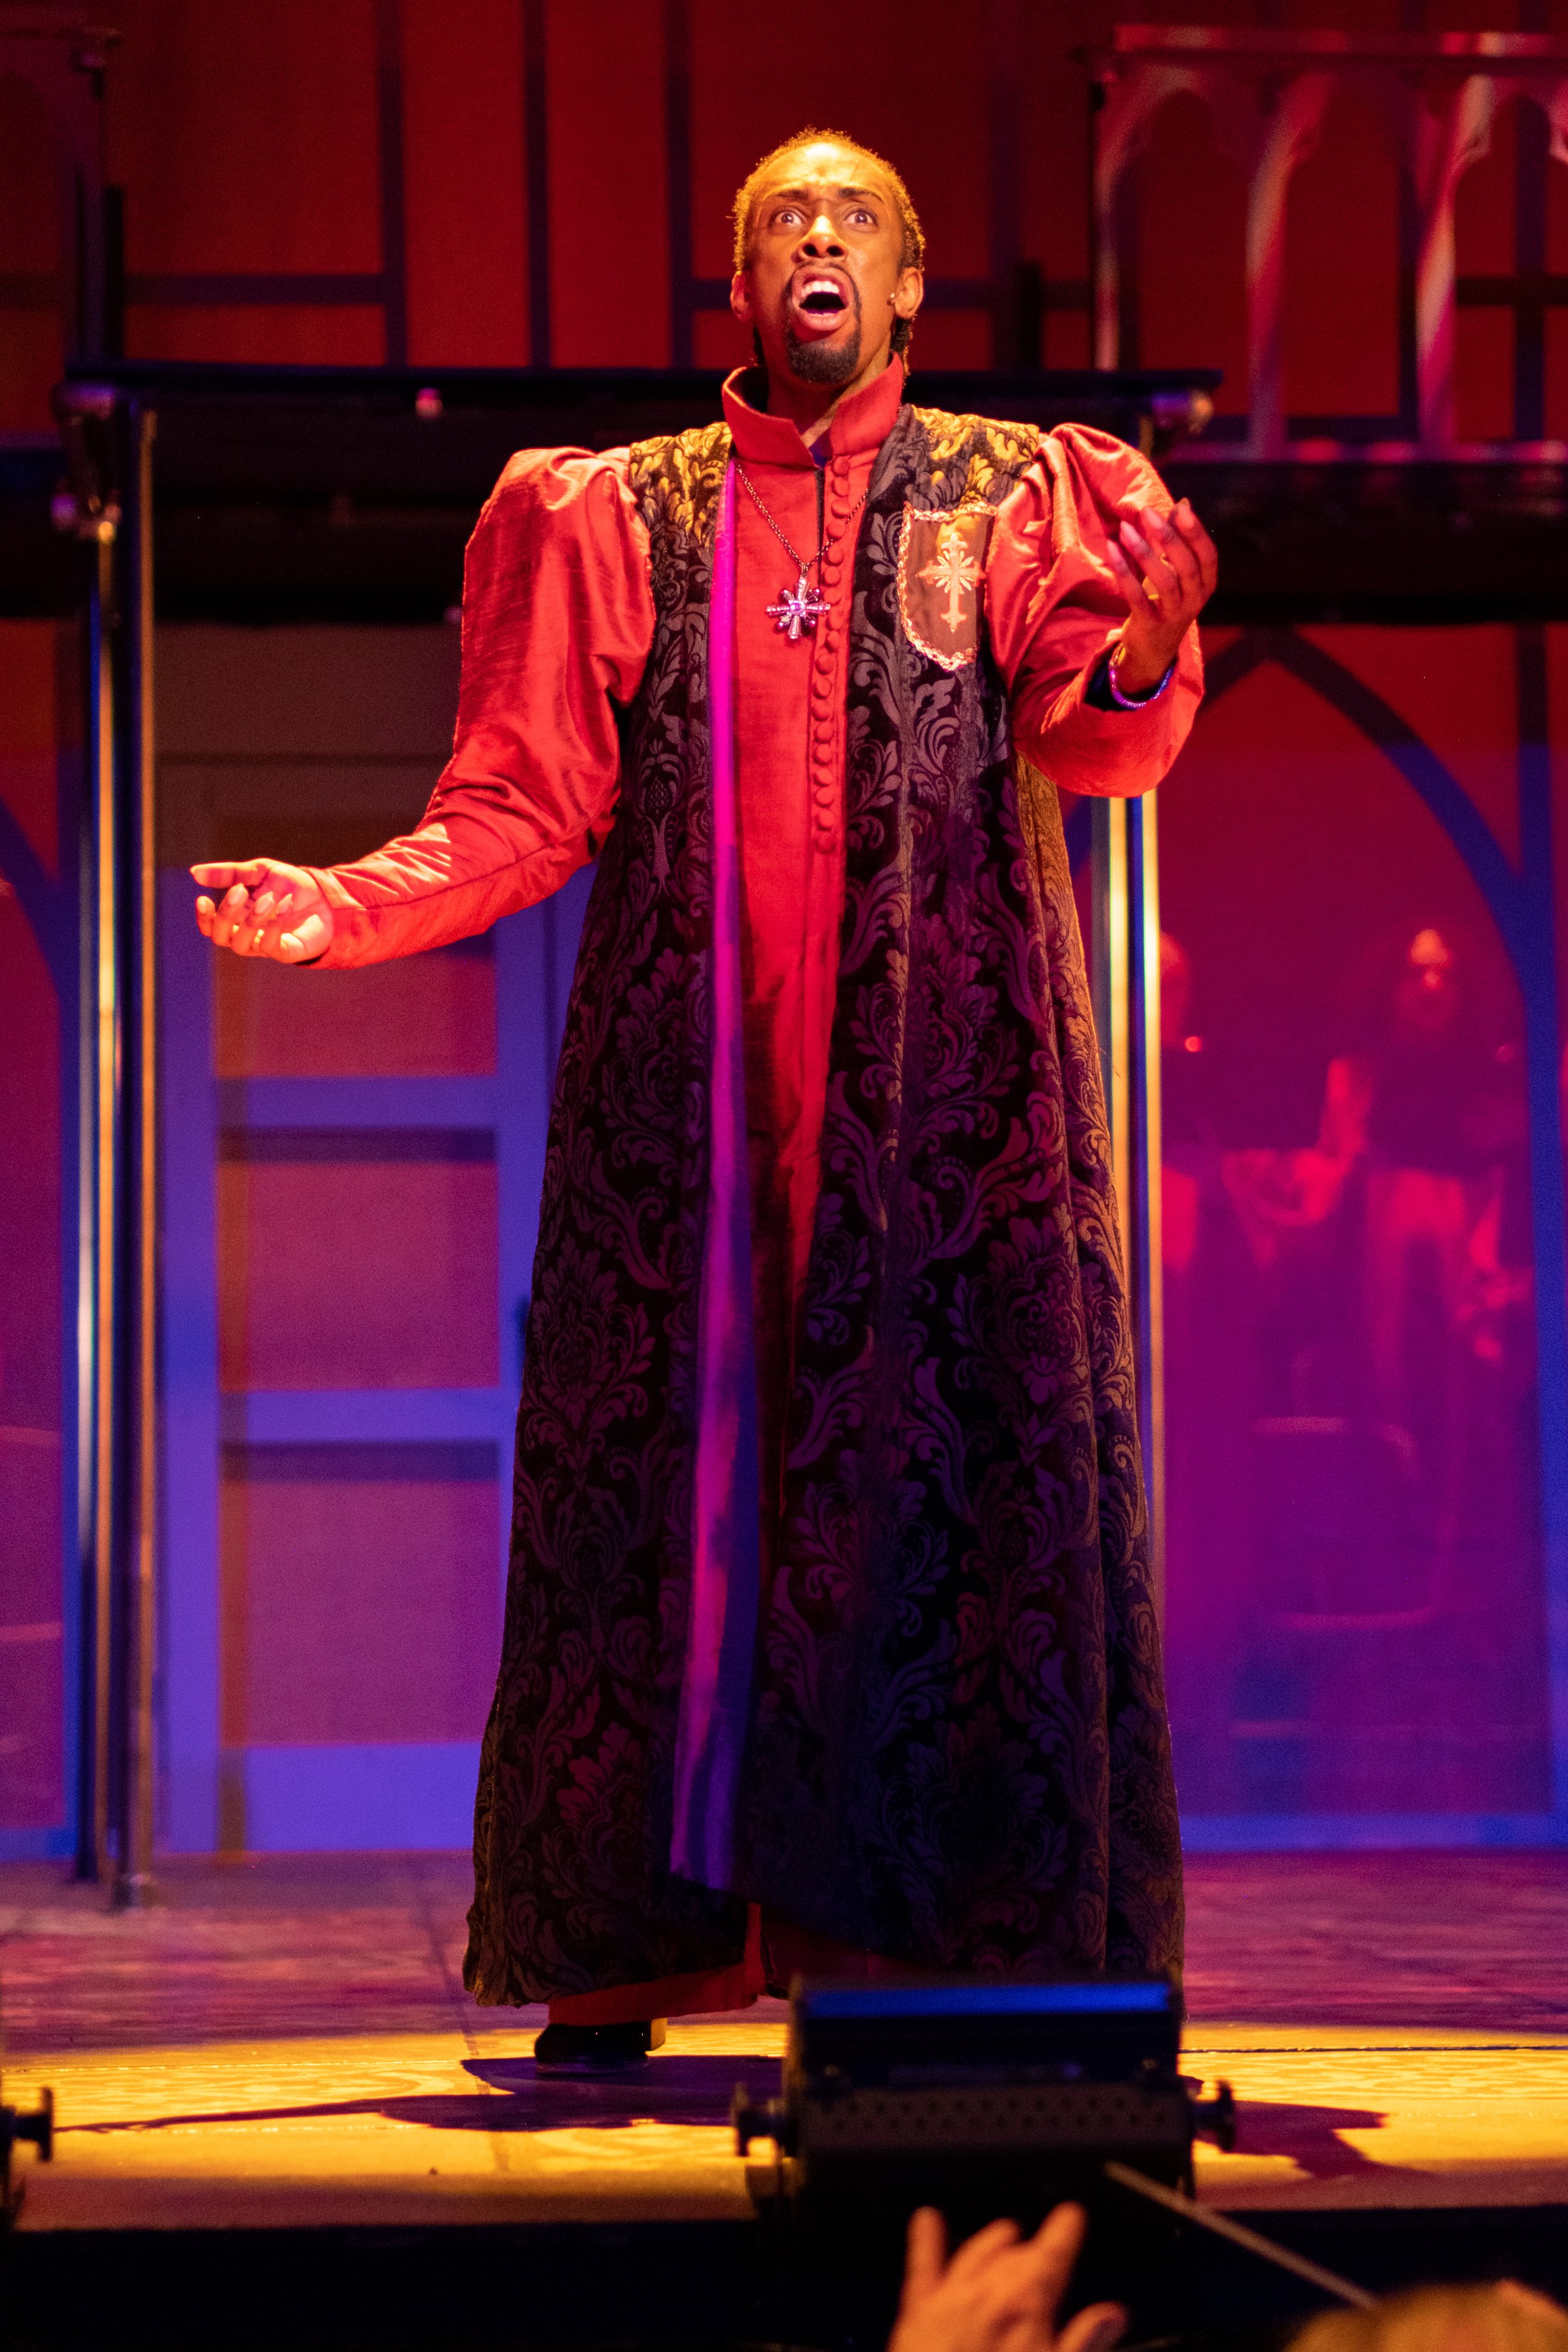  Levi Booker plays Dom Claude Frollo, Archdeacon of Notre Dame Cathedral in the musical production, The Hunchback of Notre Dame, during rehearsal on Thursday, March 30, 2023 at Santa Monica College Theare Arts and Music Departments Main Stage. (Akemi